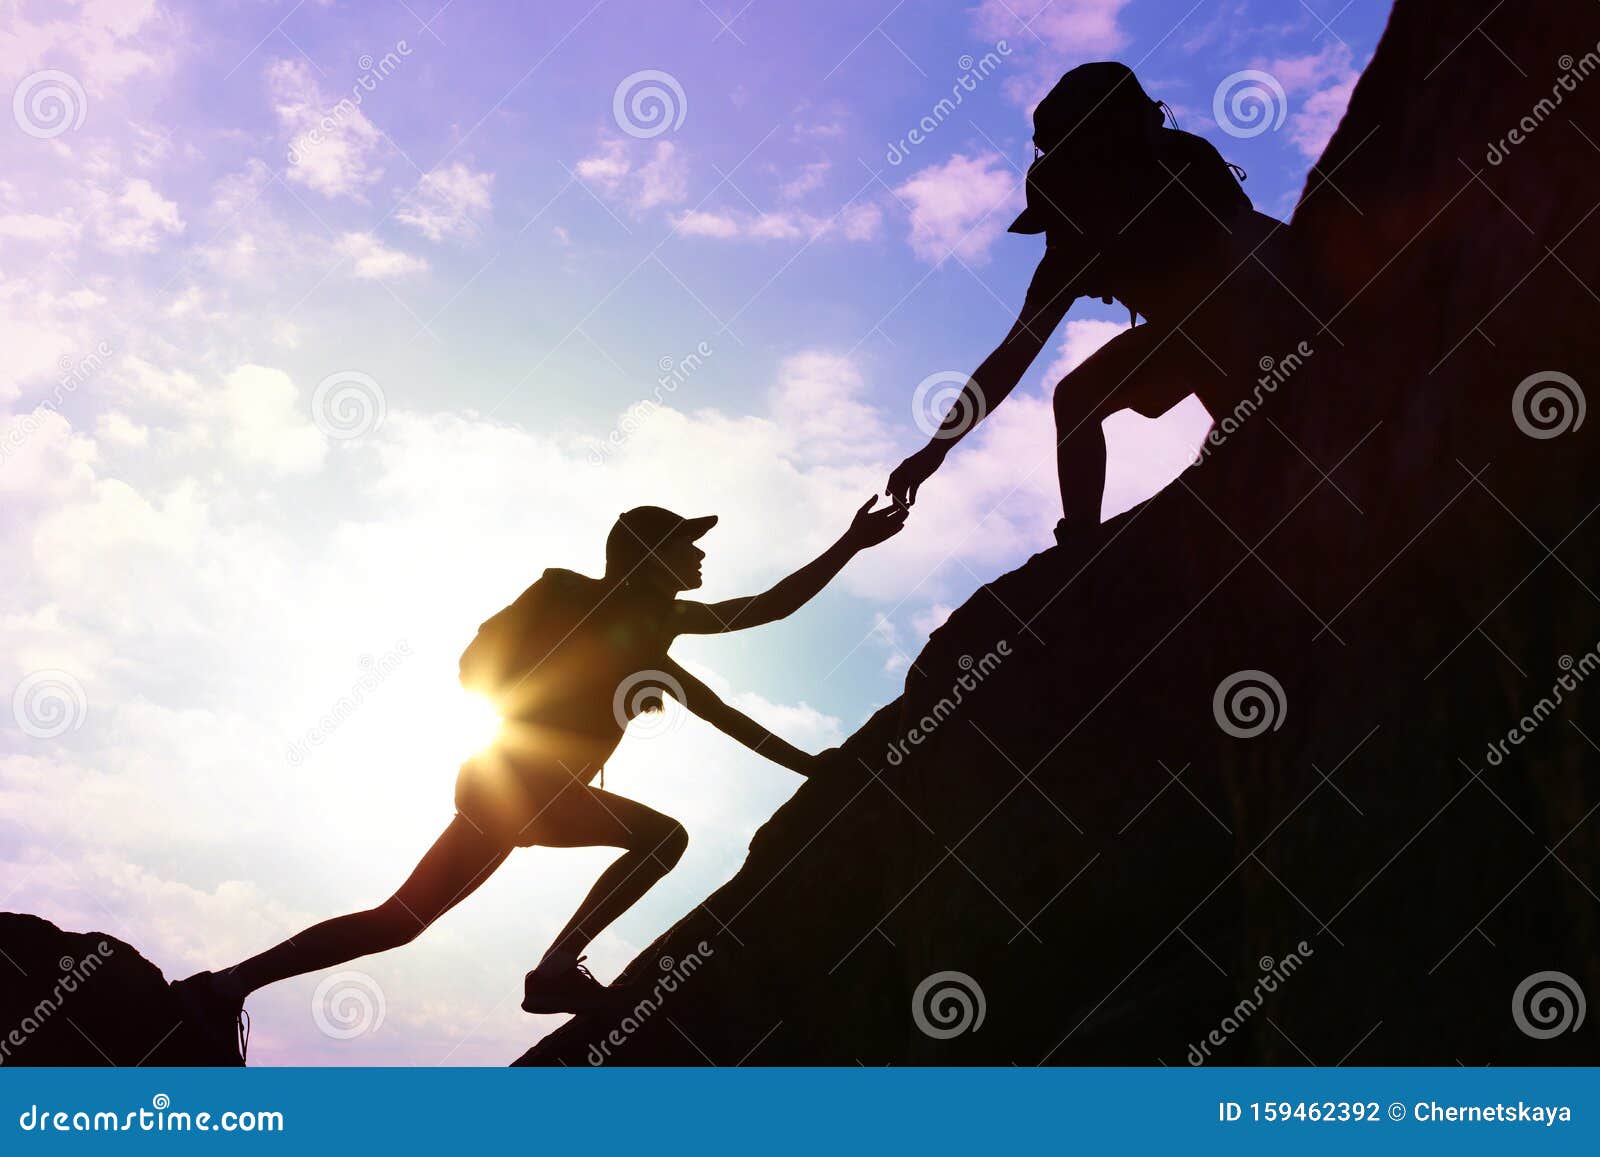 silhouettes of man and woman helping each other to climb on hill